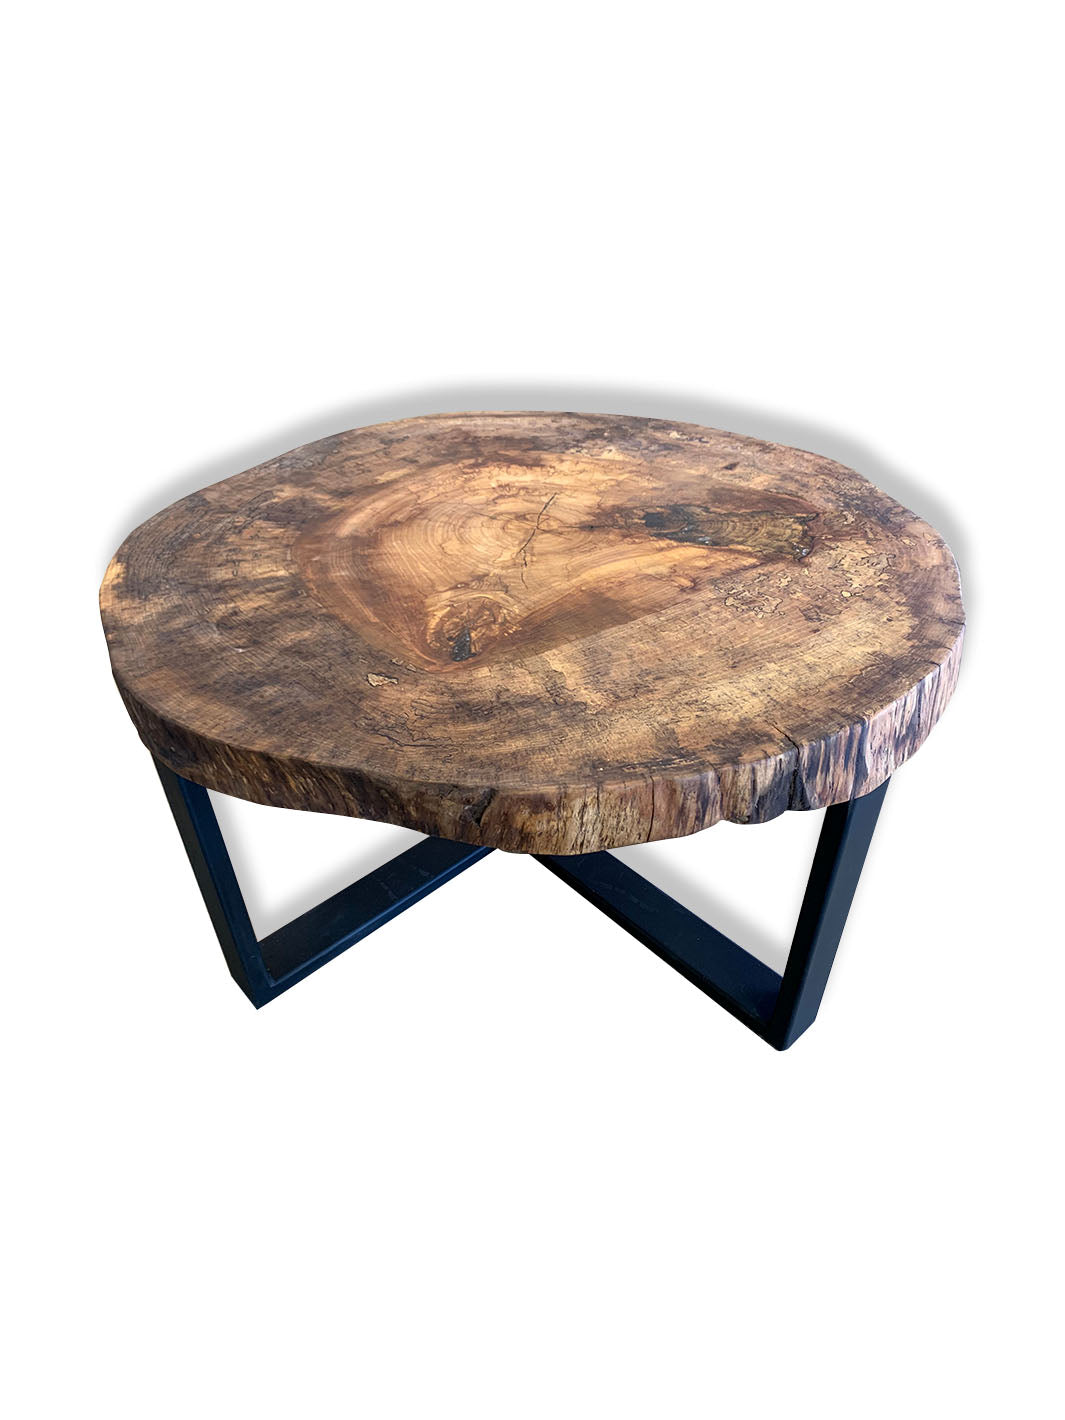 Spalted Sycamore Cookie Industrial Coffee Table